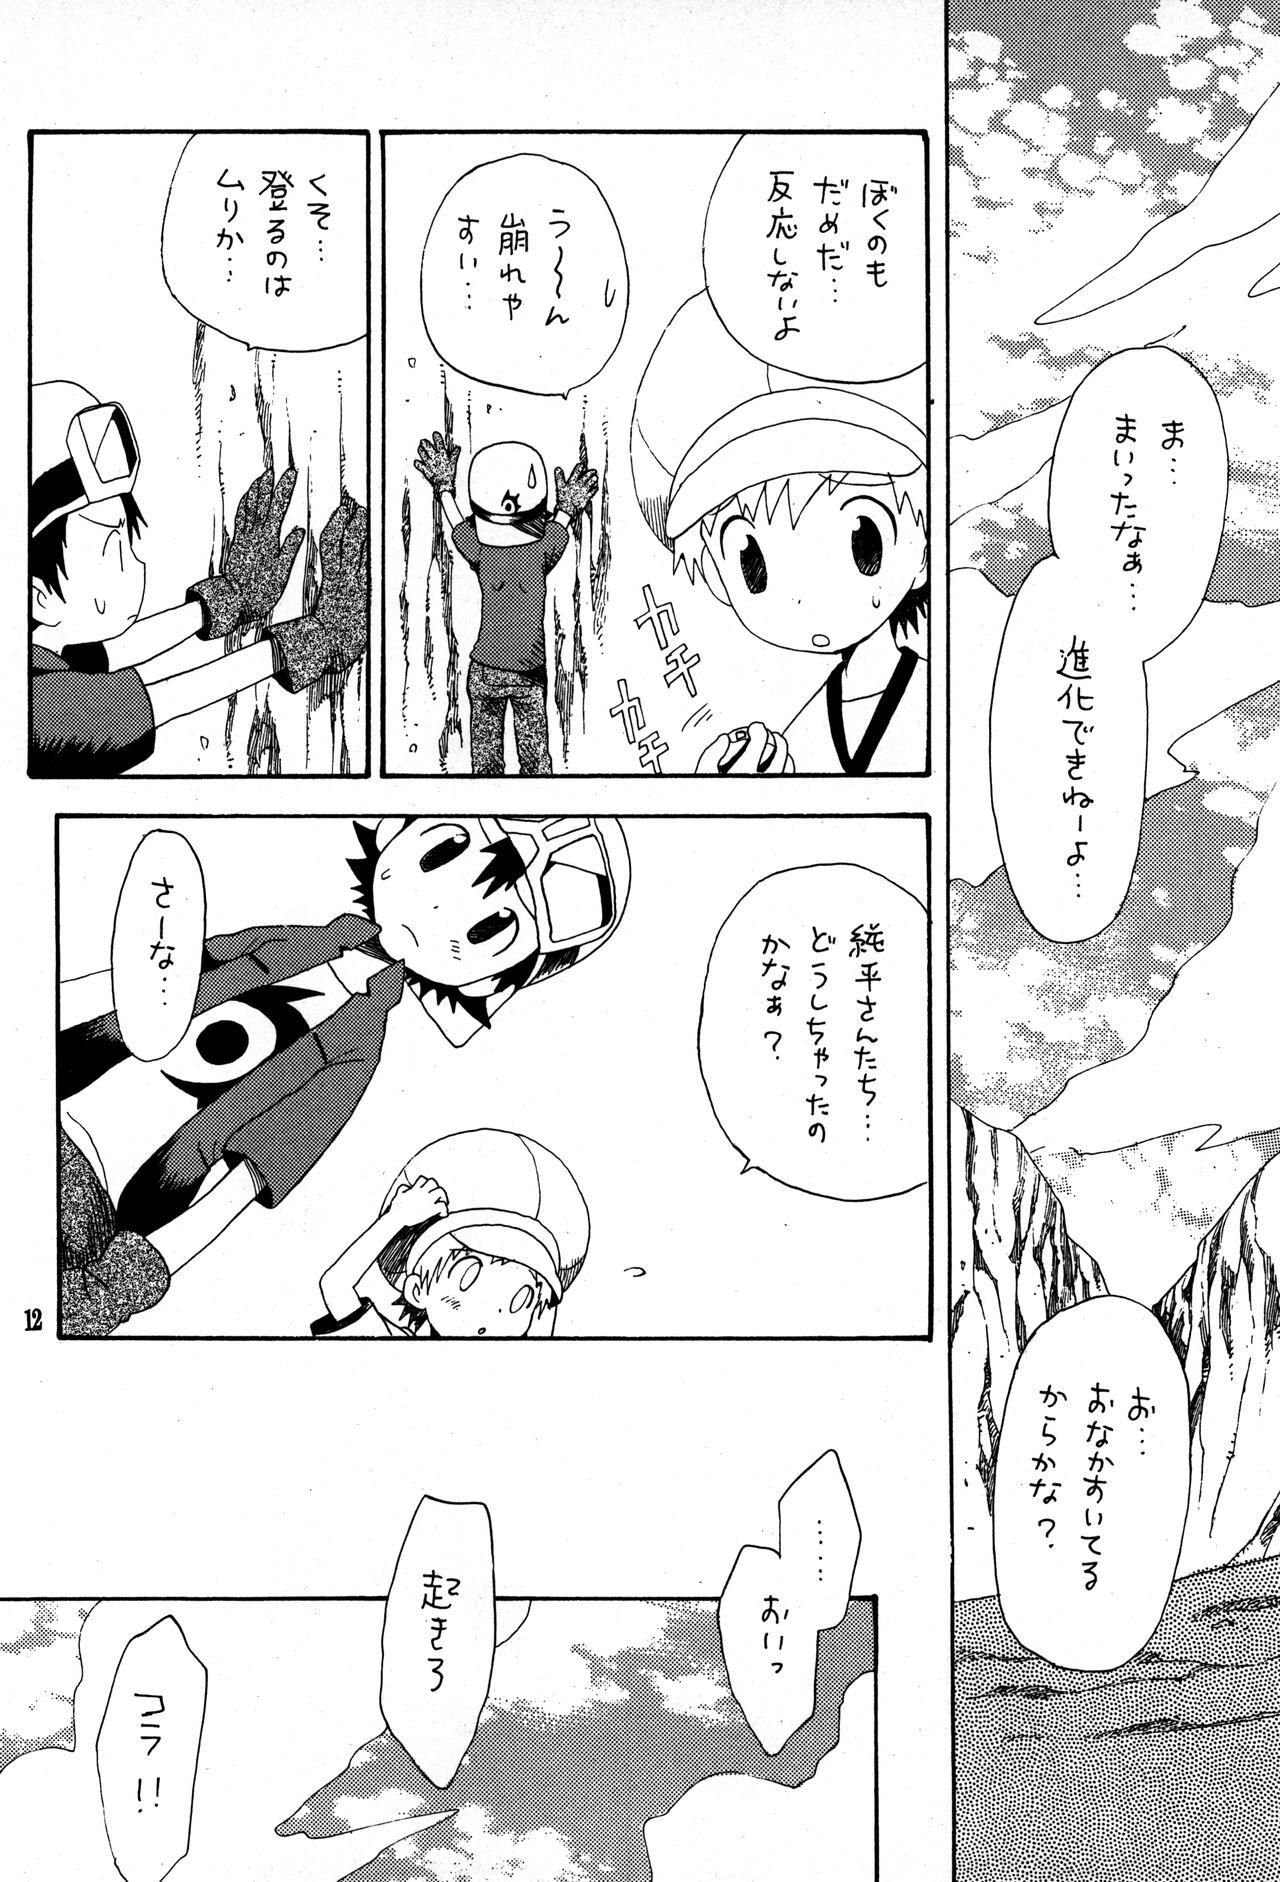 Public Nudity Brother Blue Berry - Digimon Digimon frontier Daring - Page 11